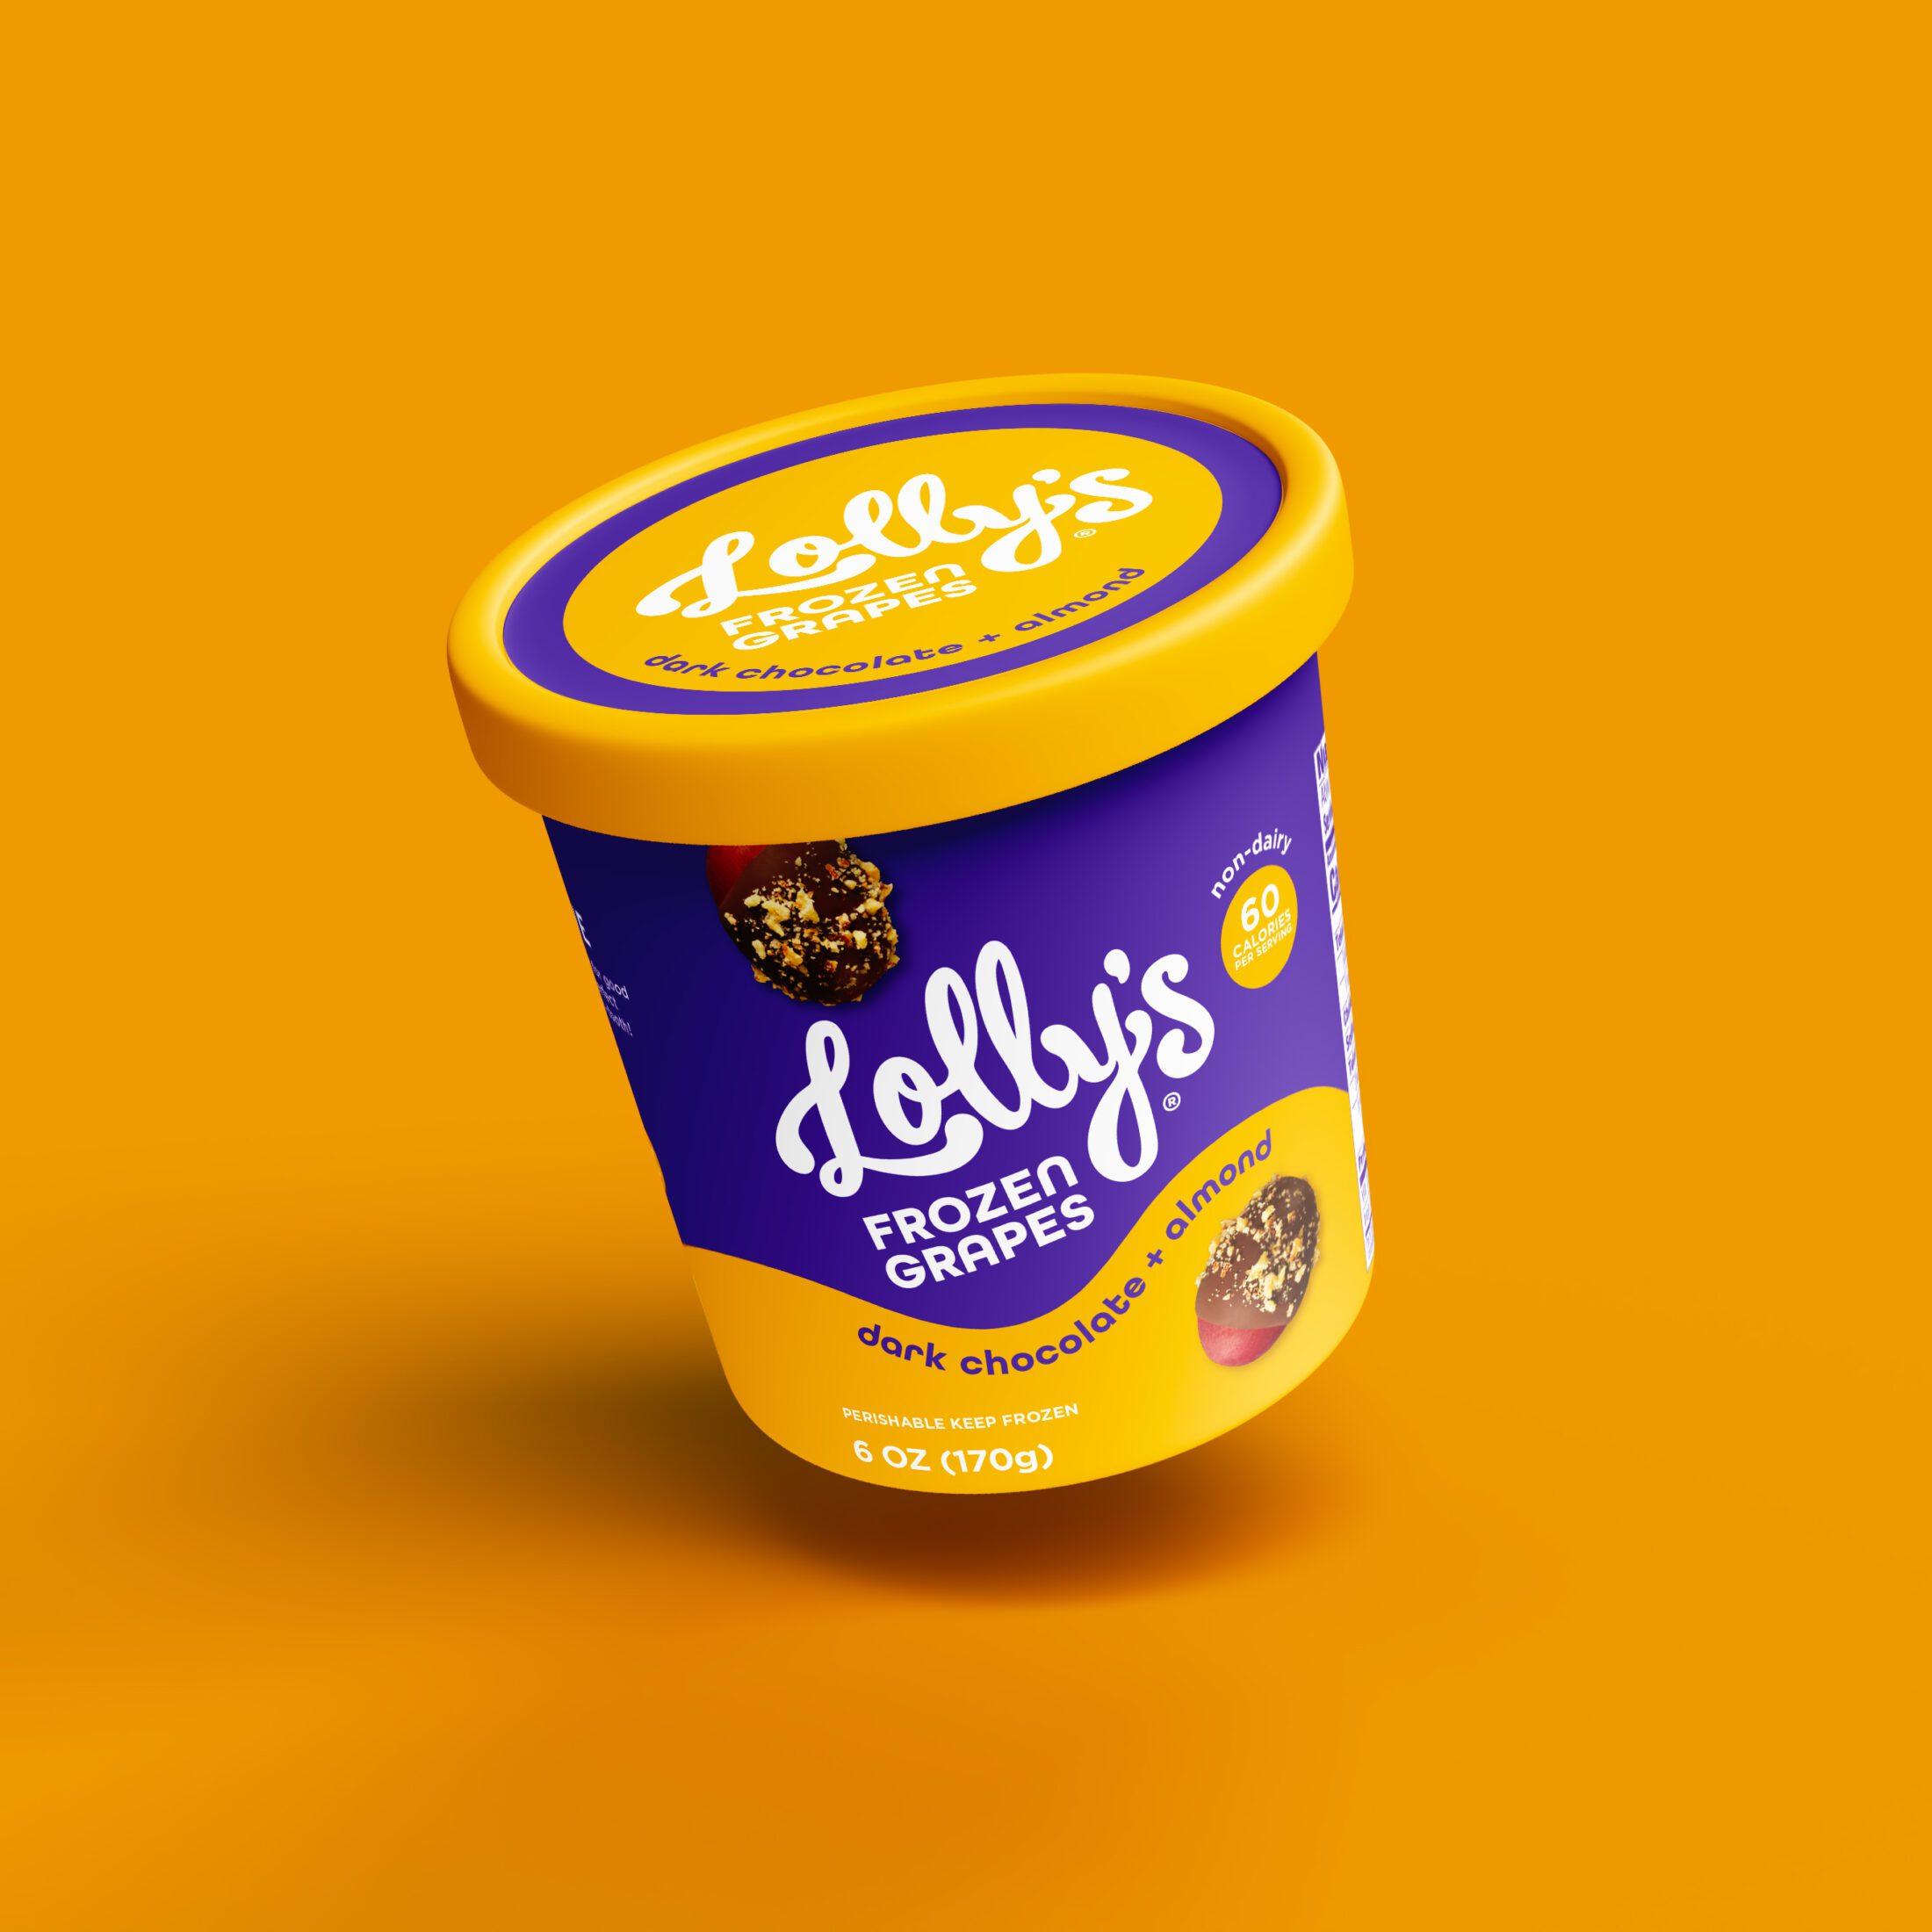 Floating tub of Lolly's Frozen Grapes - Dark Chocolate + Almond flavor on a yellow background.